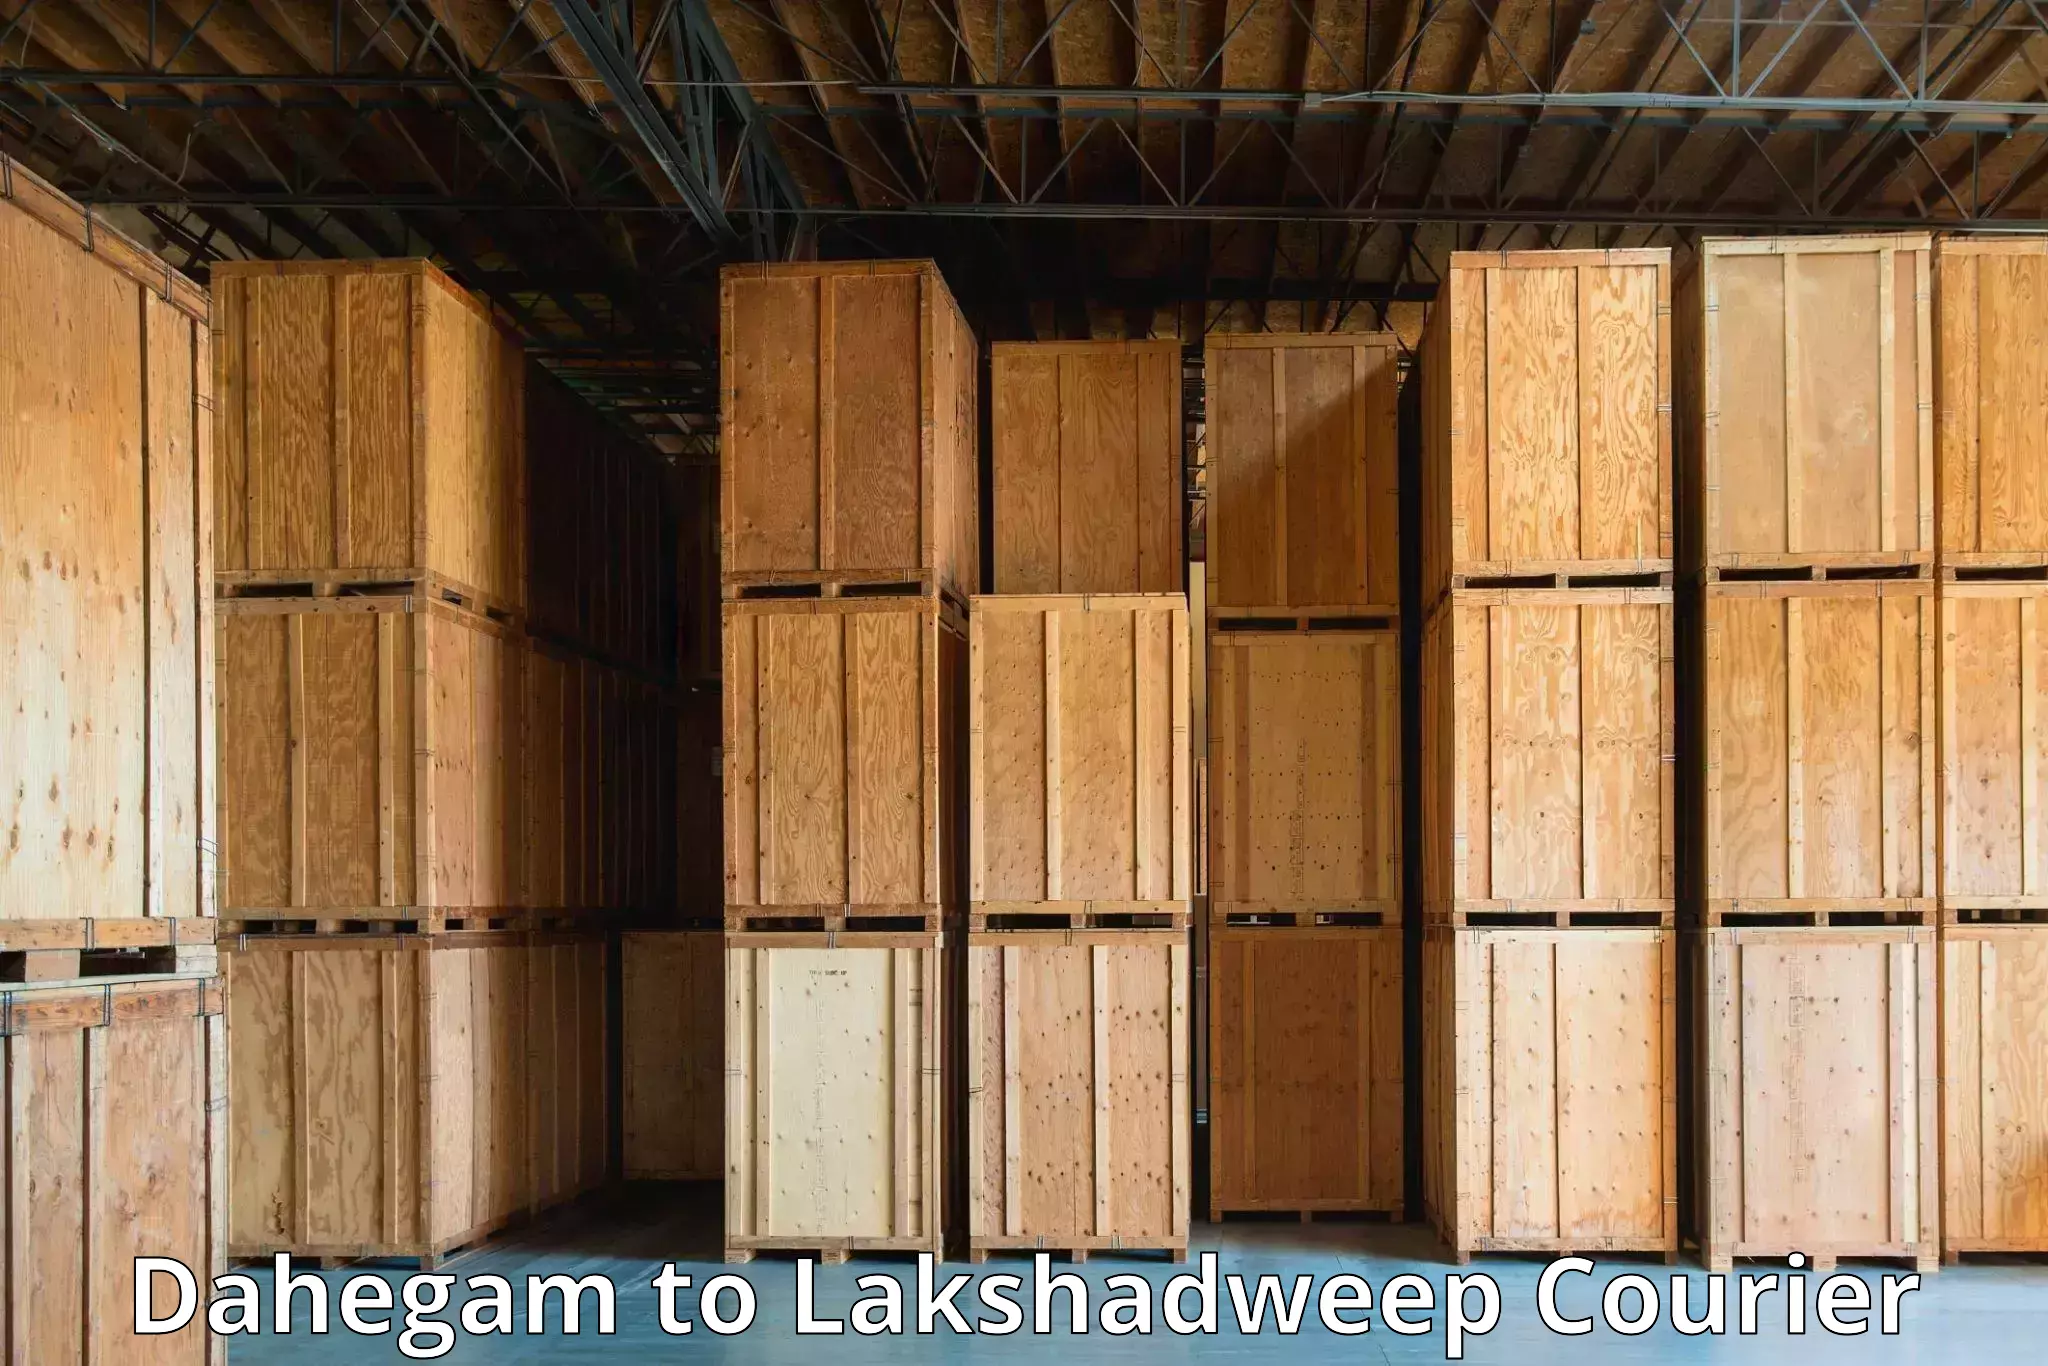 Subscription-based courier Dahegam to Lakshadweep